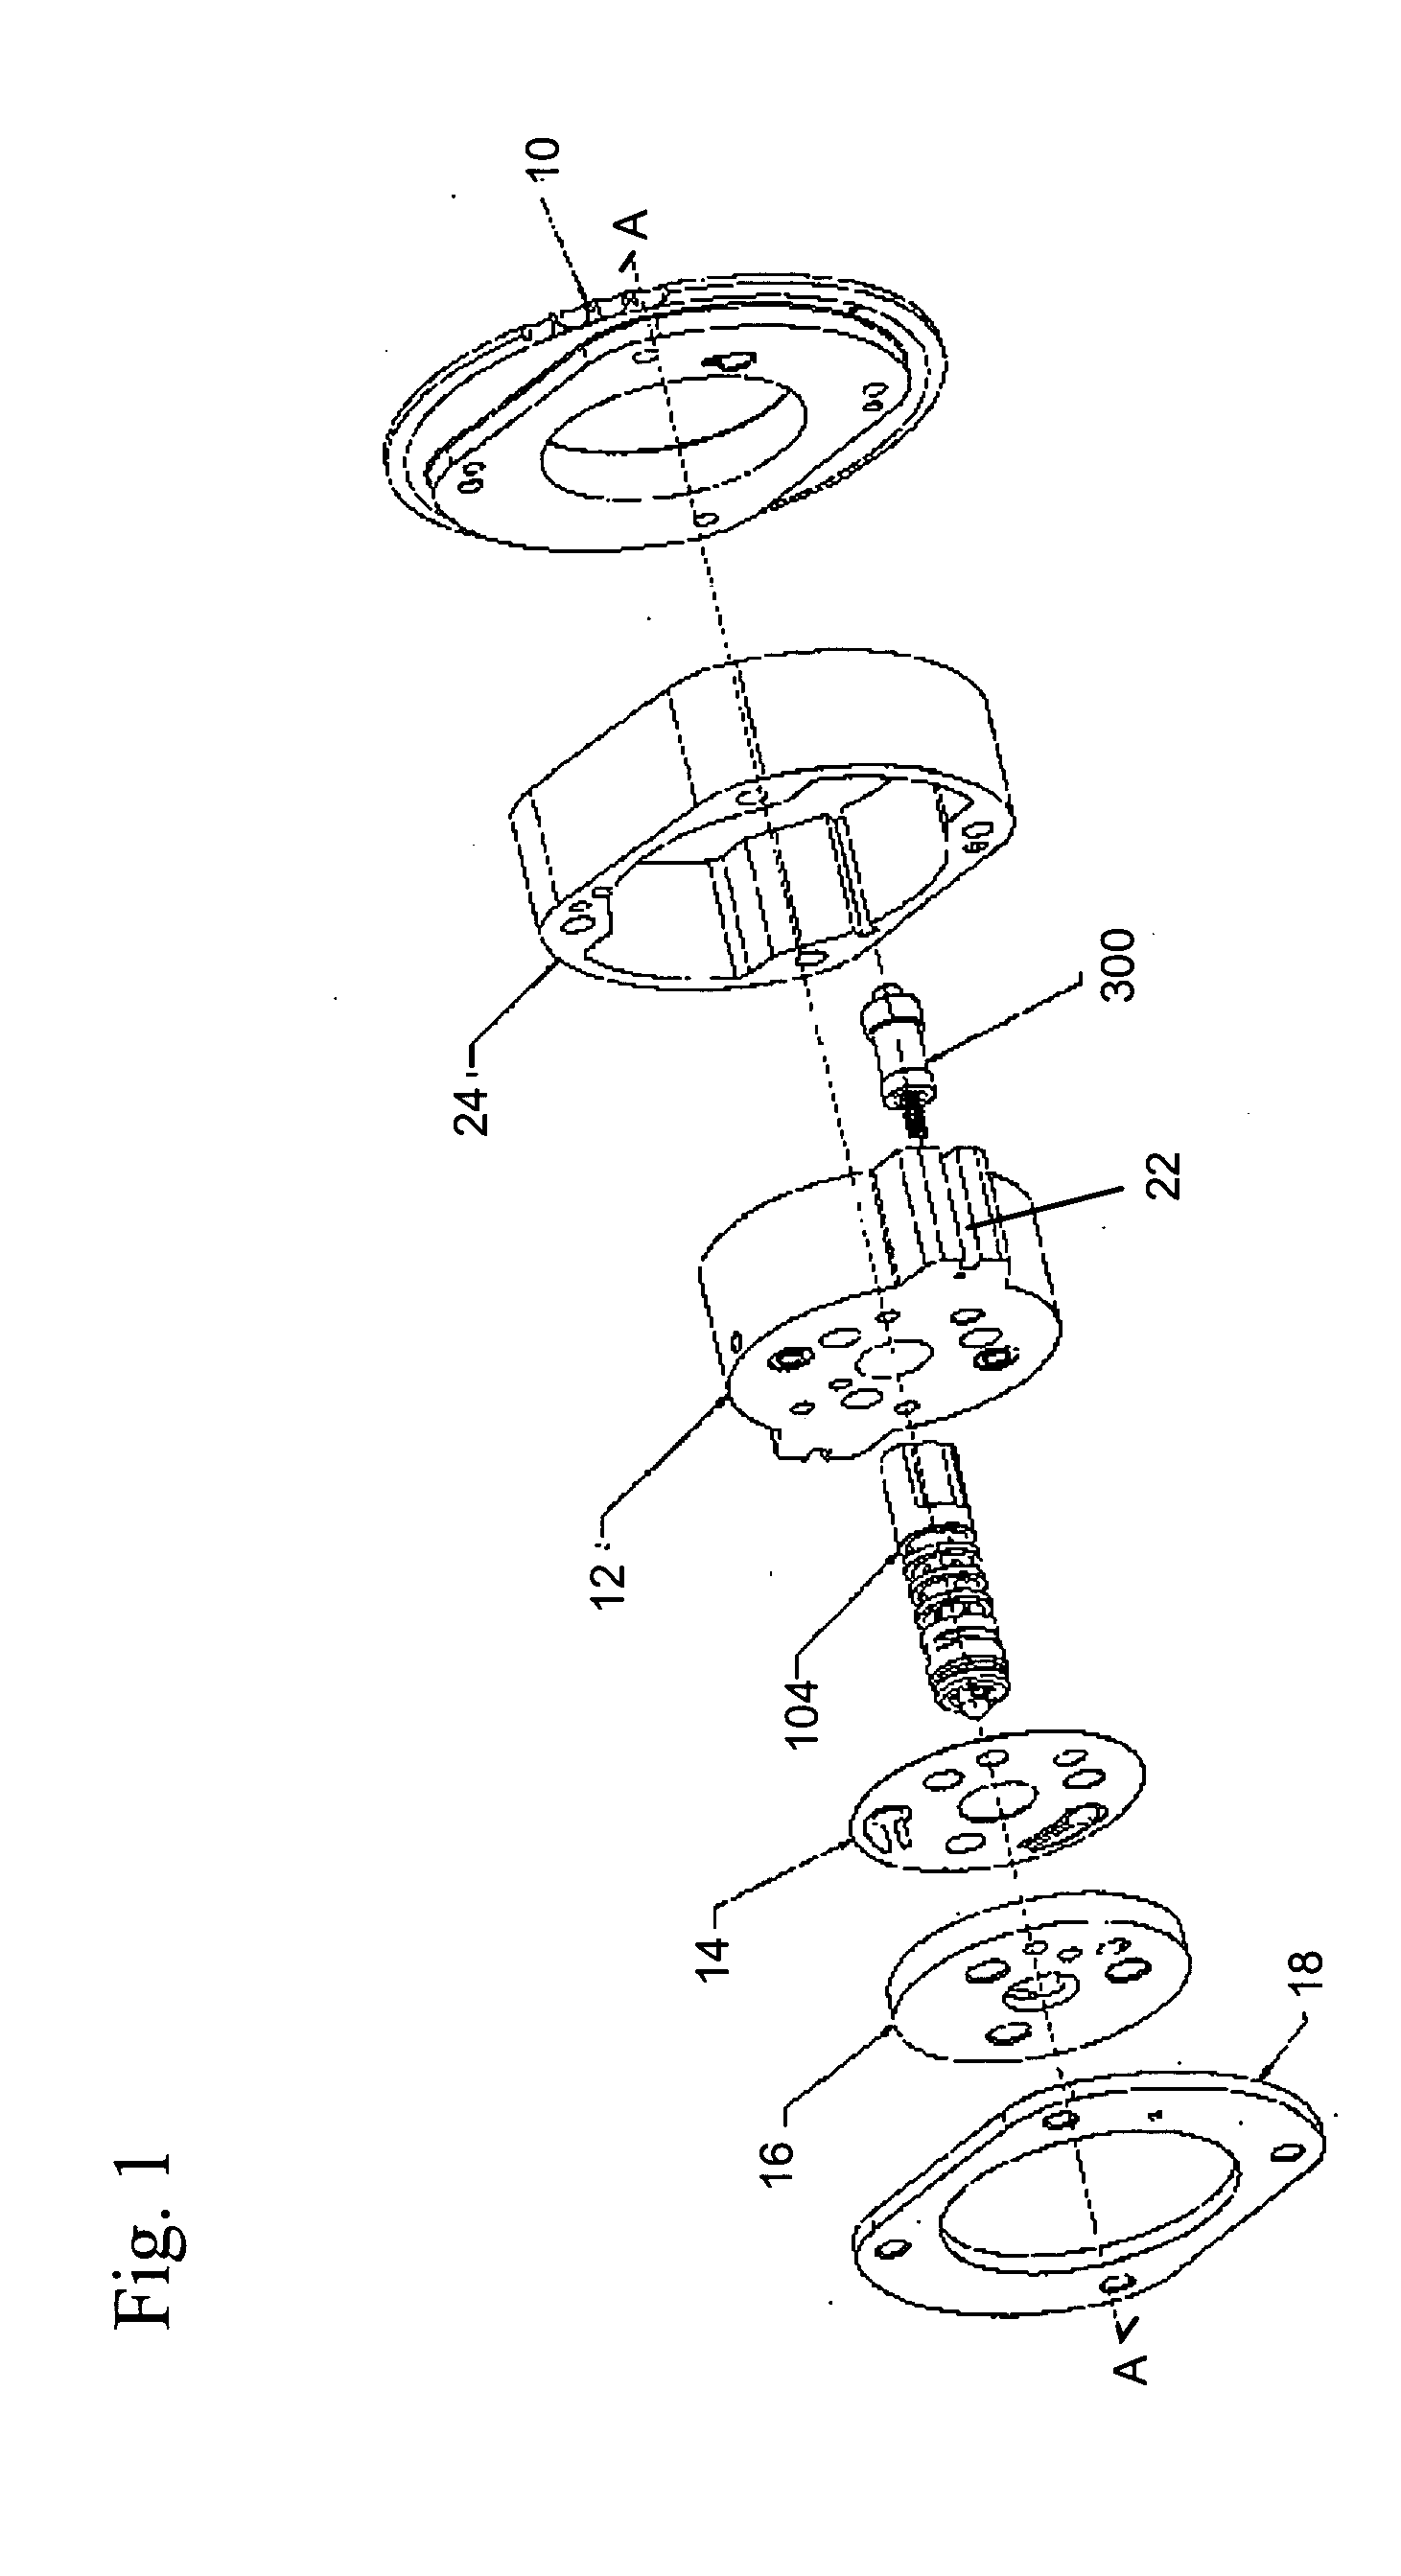 CTA phaser with proportional oil pressure for actuation at engine condition with low cam torsionals